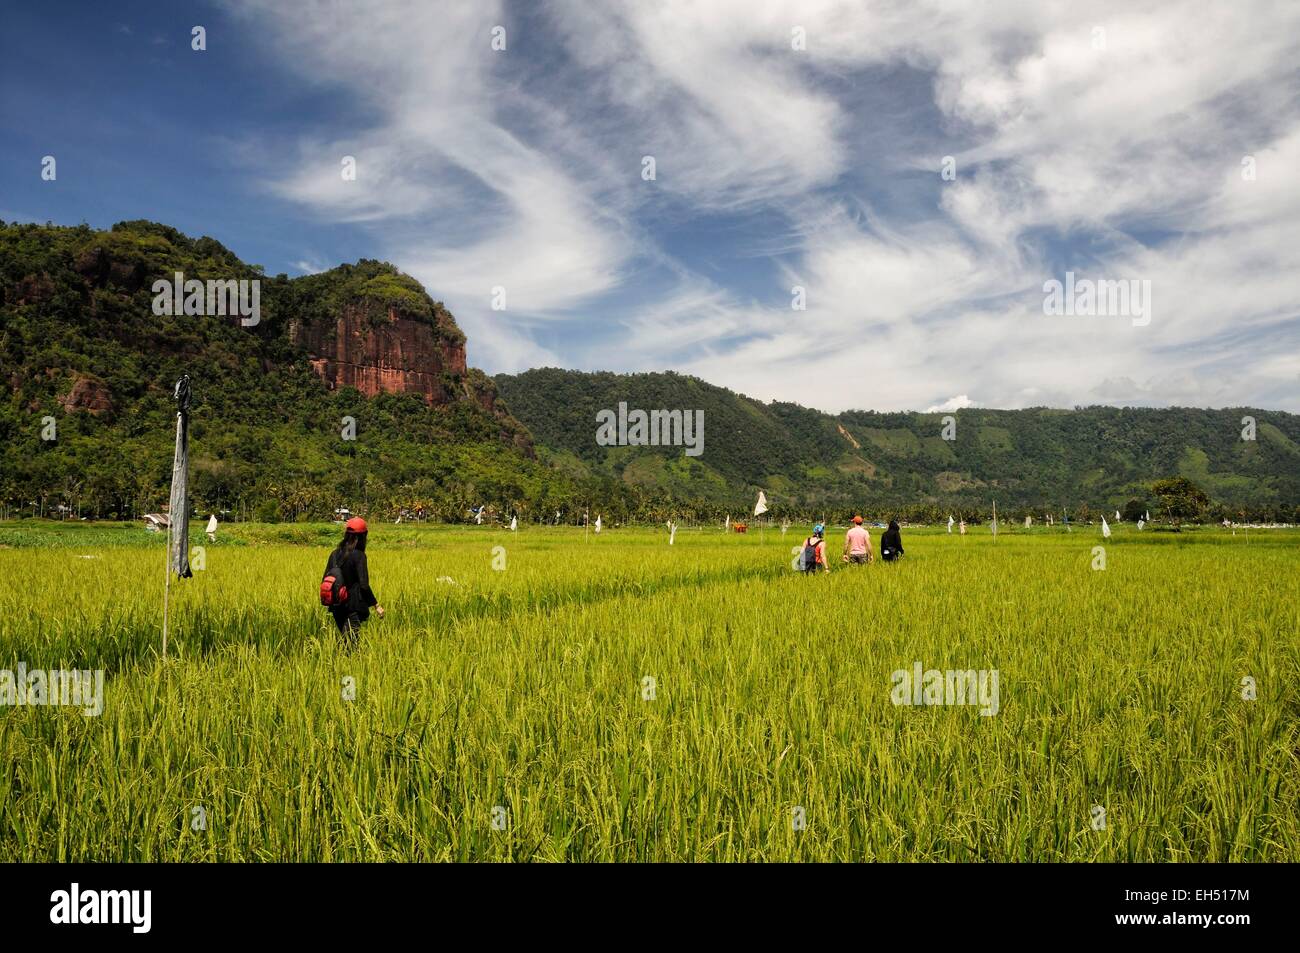 Indonesia, West Sumatra, Minangkabau Highlands, Bukittinggi area, Harau valley, group of hikers in the rice fields surrounded by cliffs in Harau valley Stock Photo